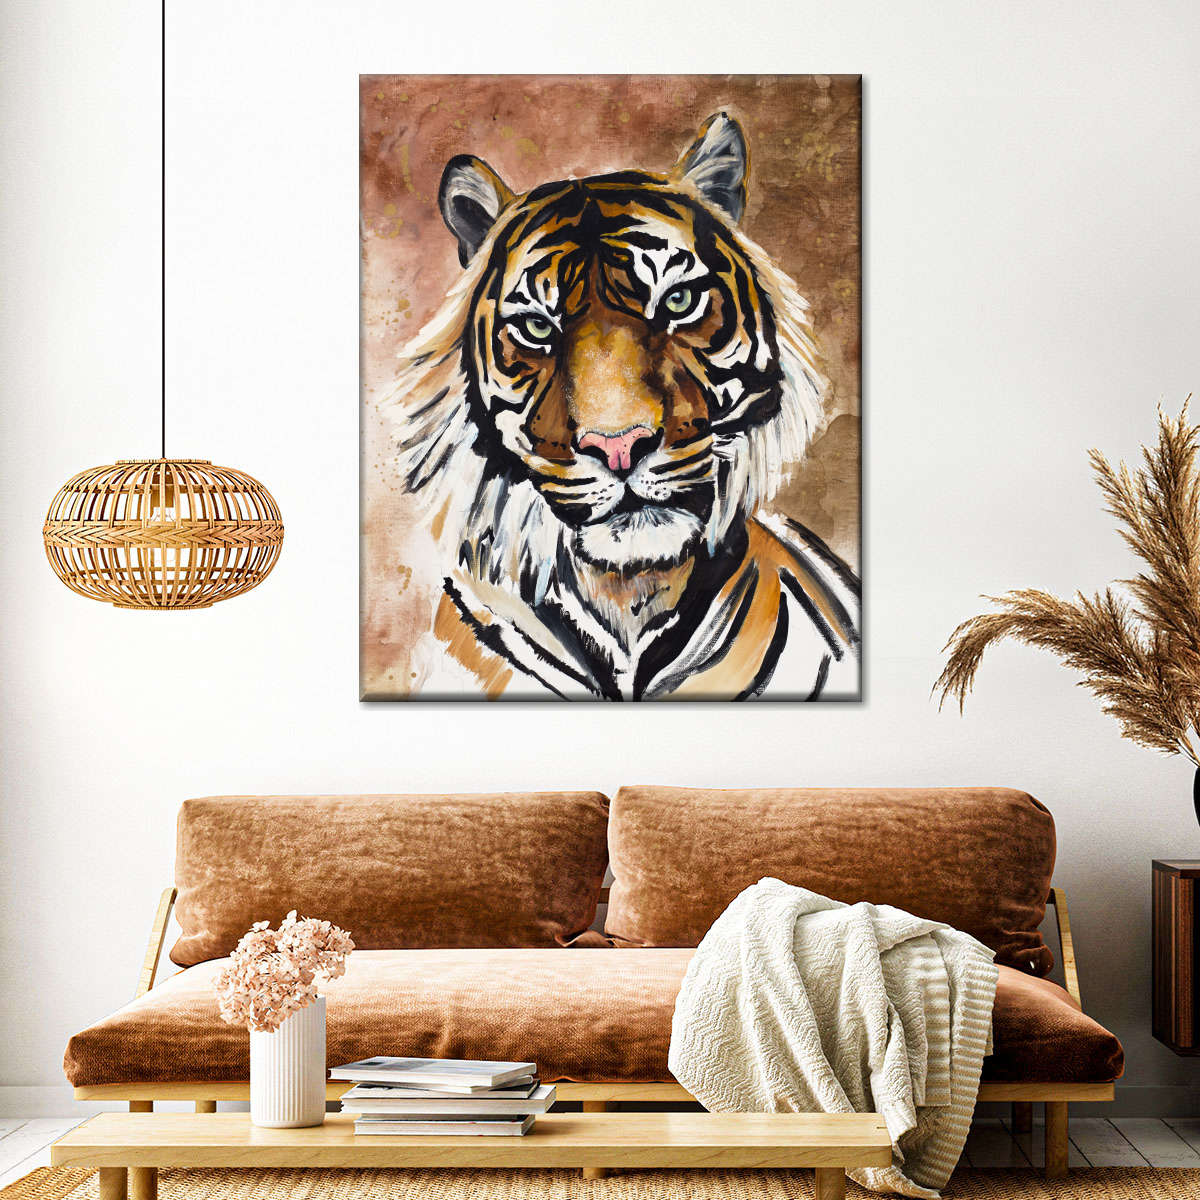 Tiger Portrait Wall Art | Painting | by Chelsea Goodrich